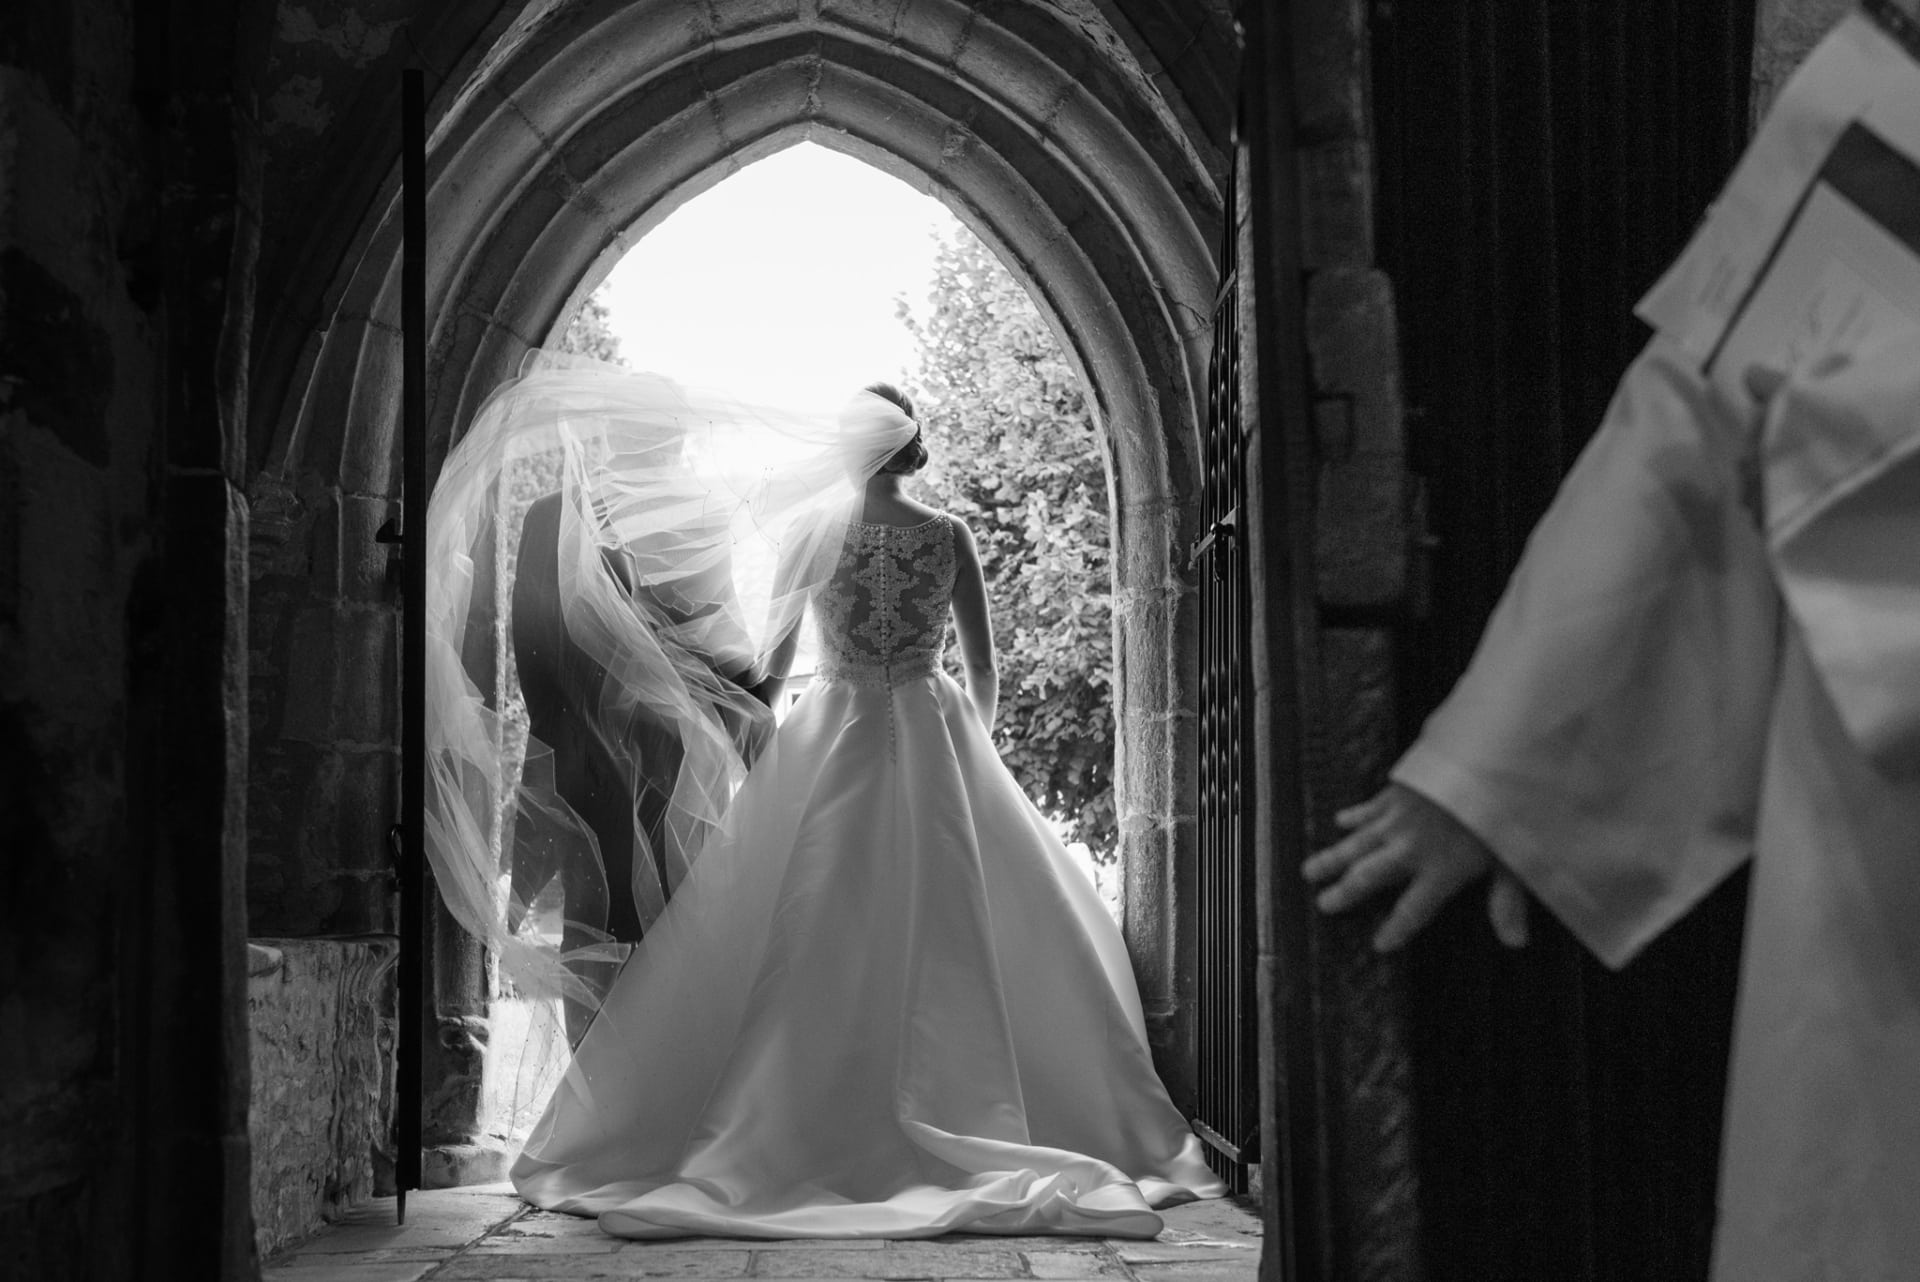 Bride's veil blowing as the couple walk out of church